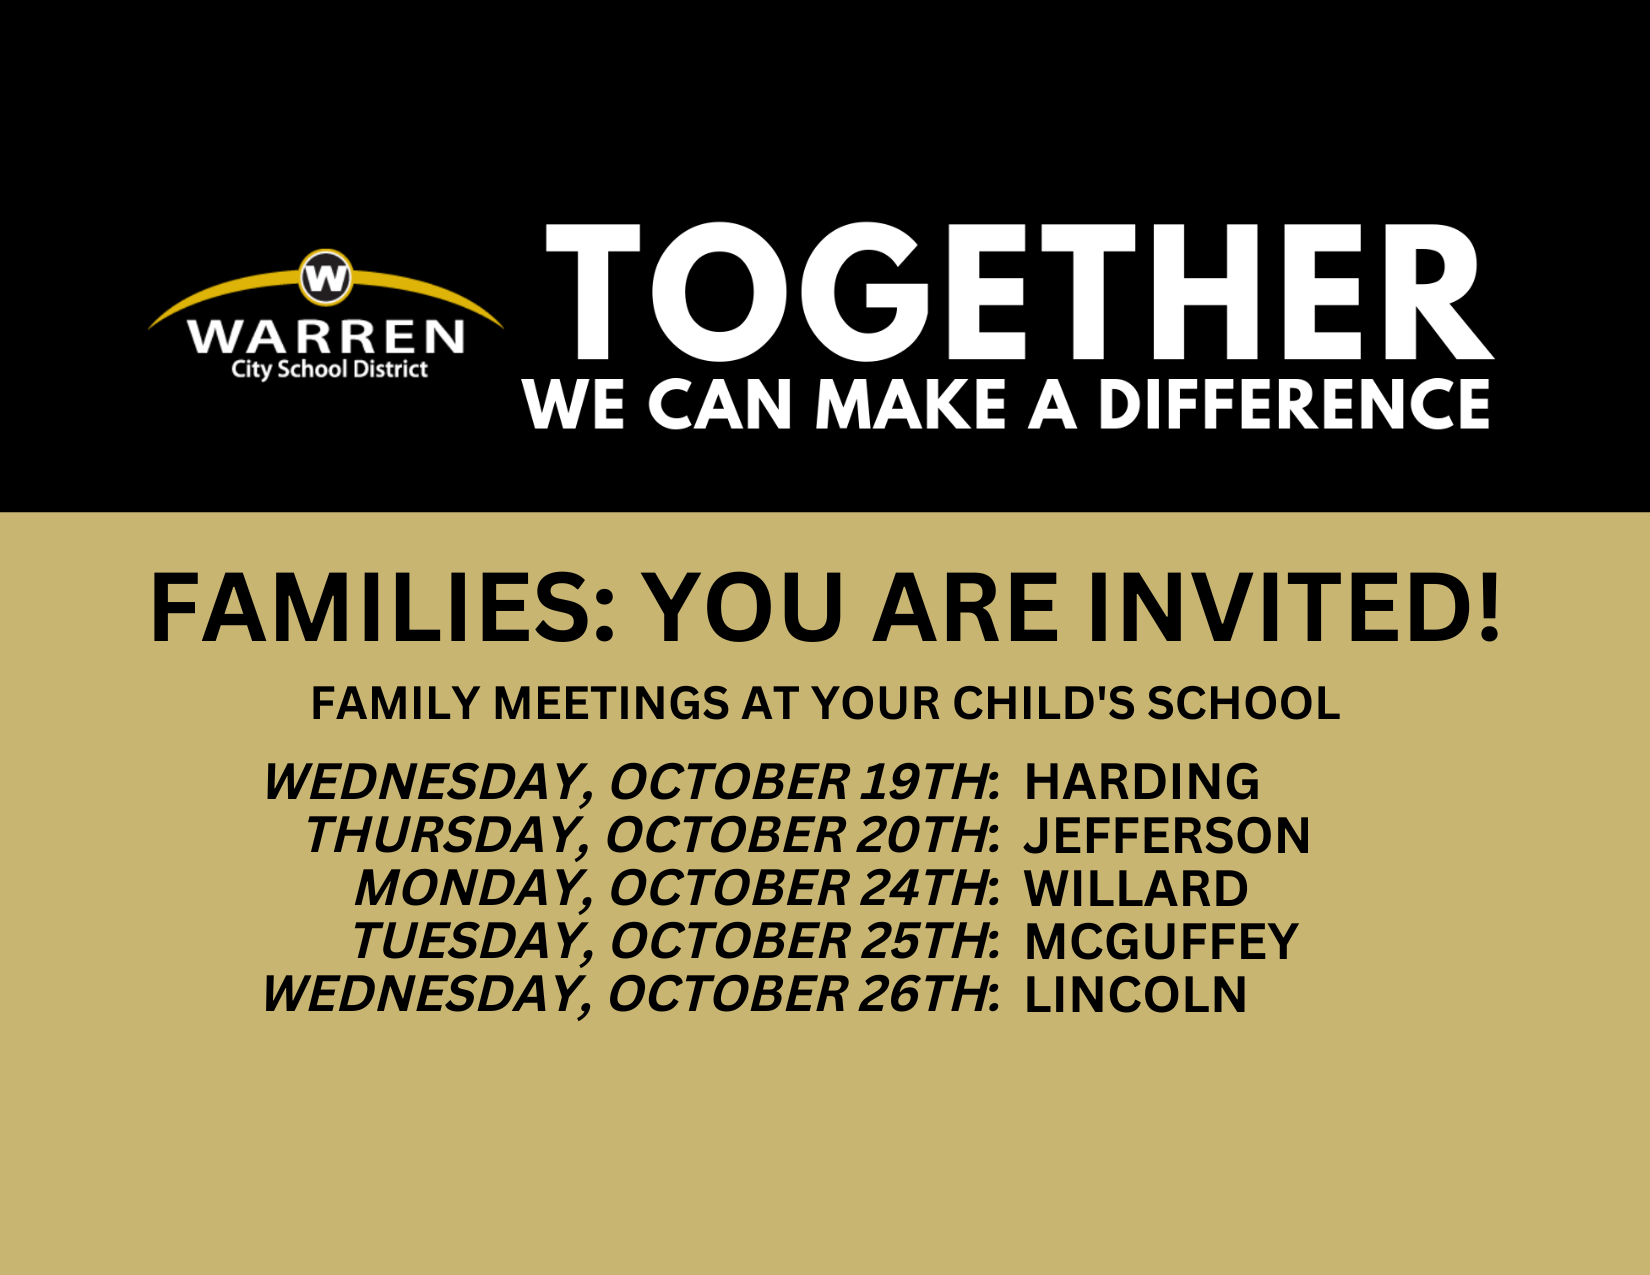 All WCS SCHOOLS TO HOST FAMILY MEETINGS IN OCTOBER: Morning & Evening Sessions